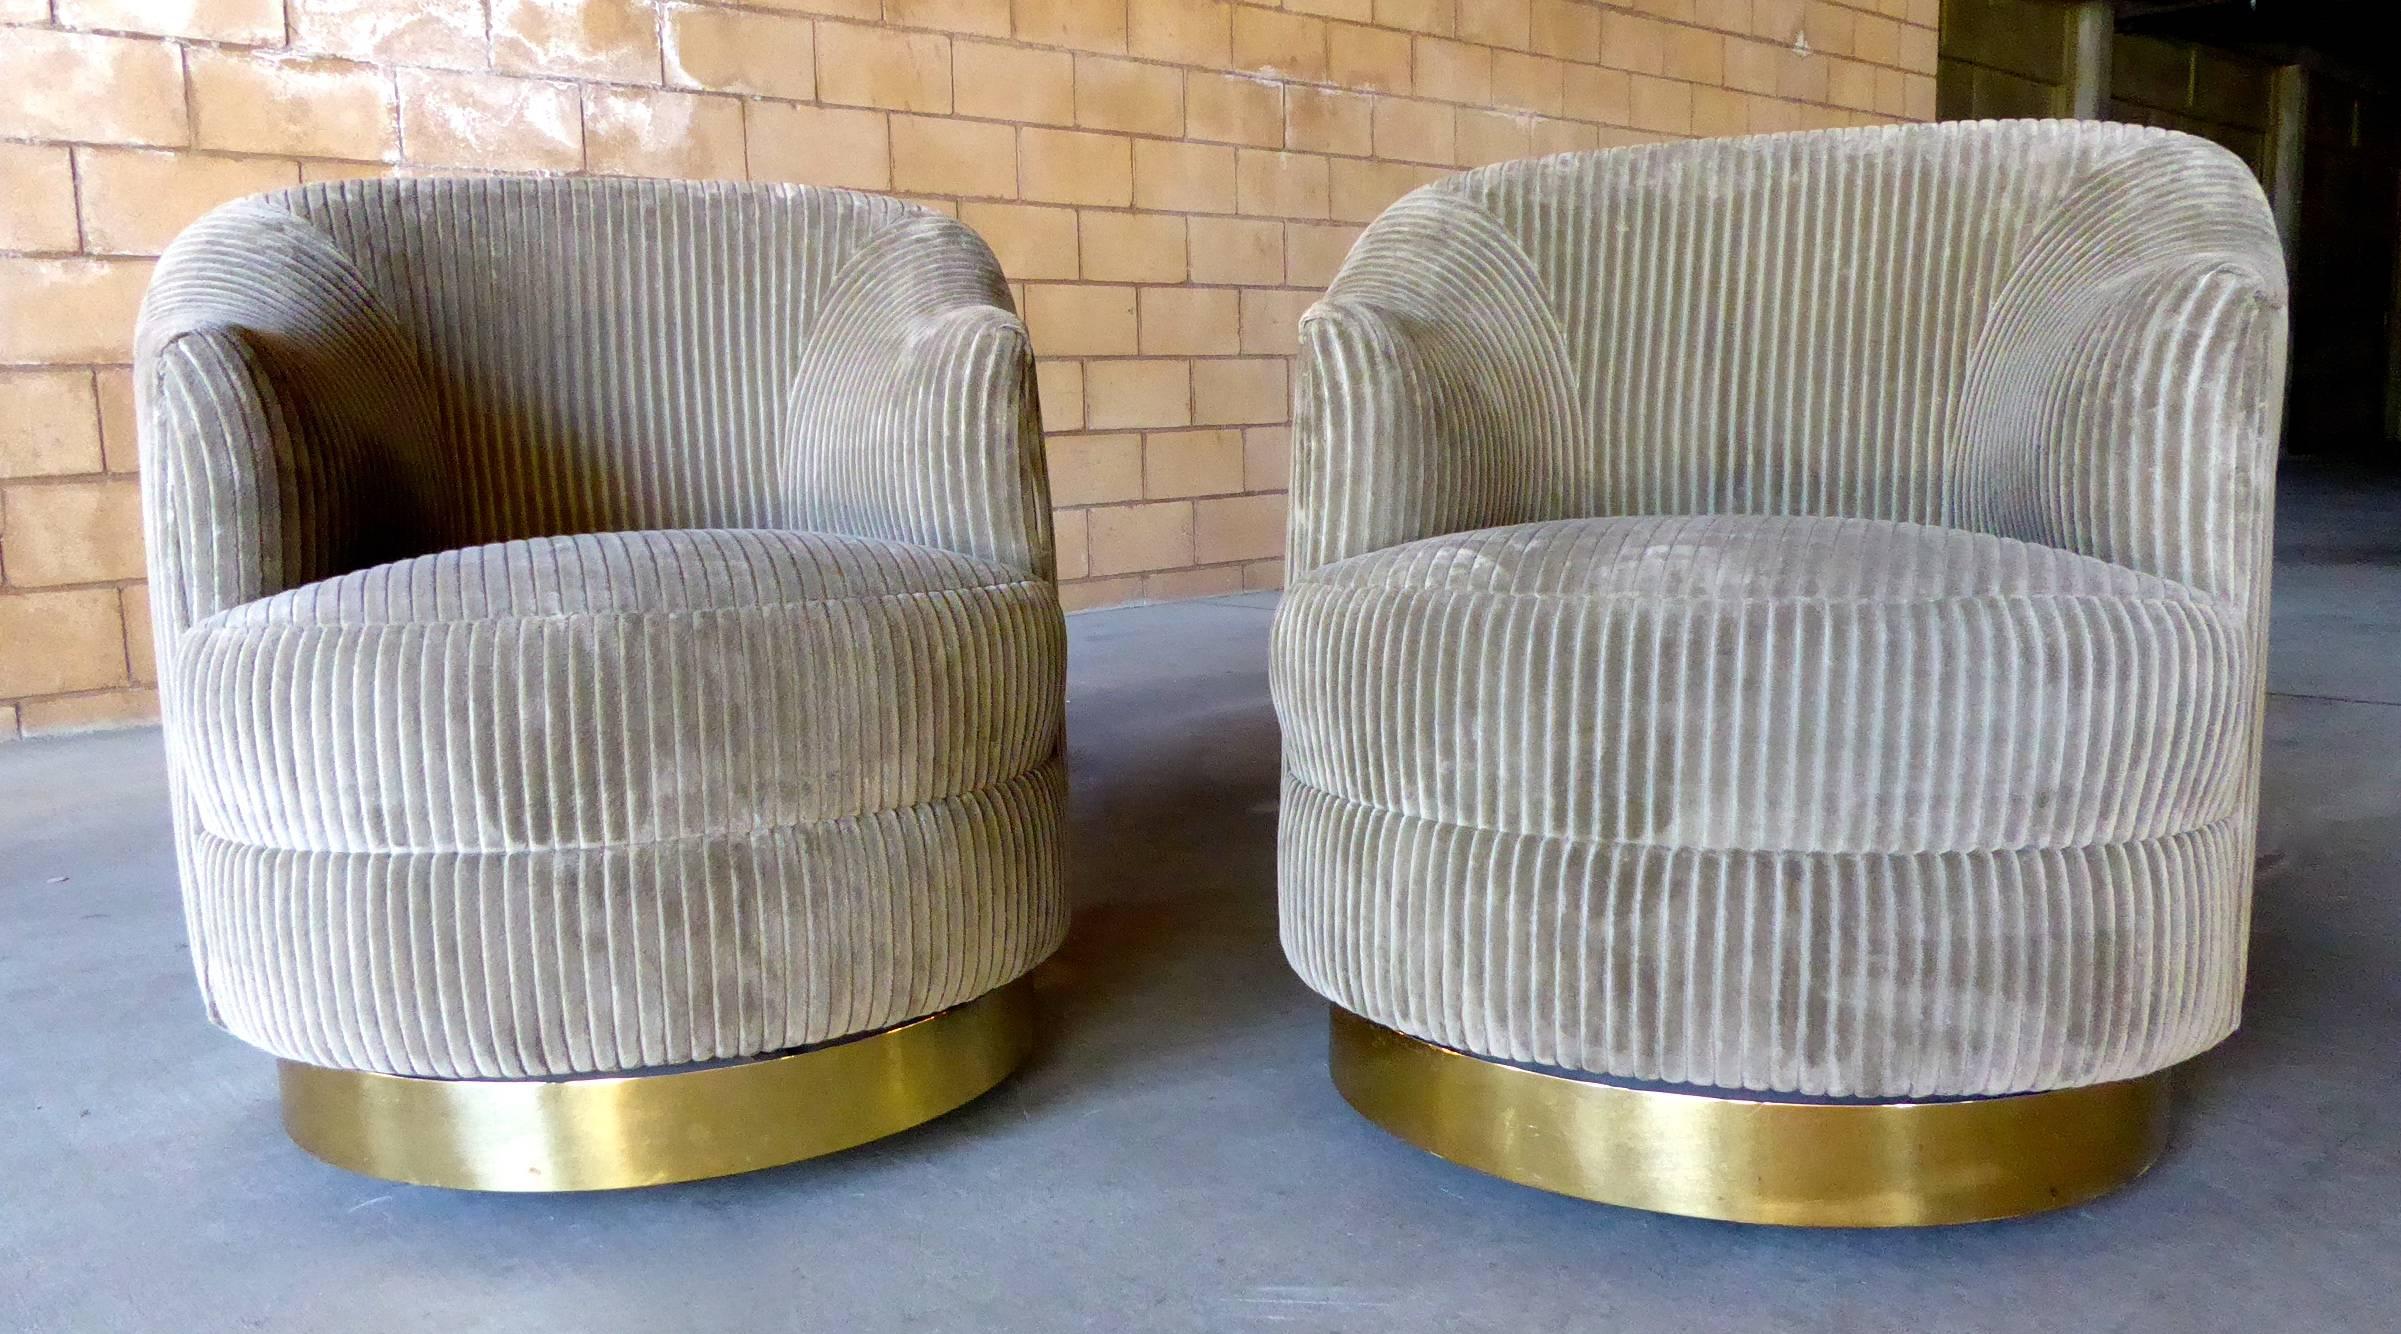 A pair of circular club chairs with brass plated metal bases, designed by Karl Springer and made in the 1970s. The chairs have casters underneath the bases and move easily. They have been recently upholstered in a tan/coffee-colored wide wale